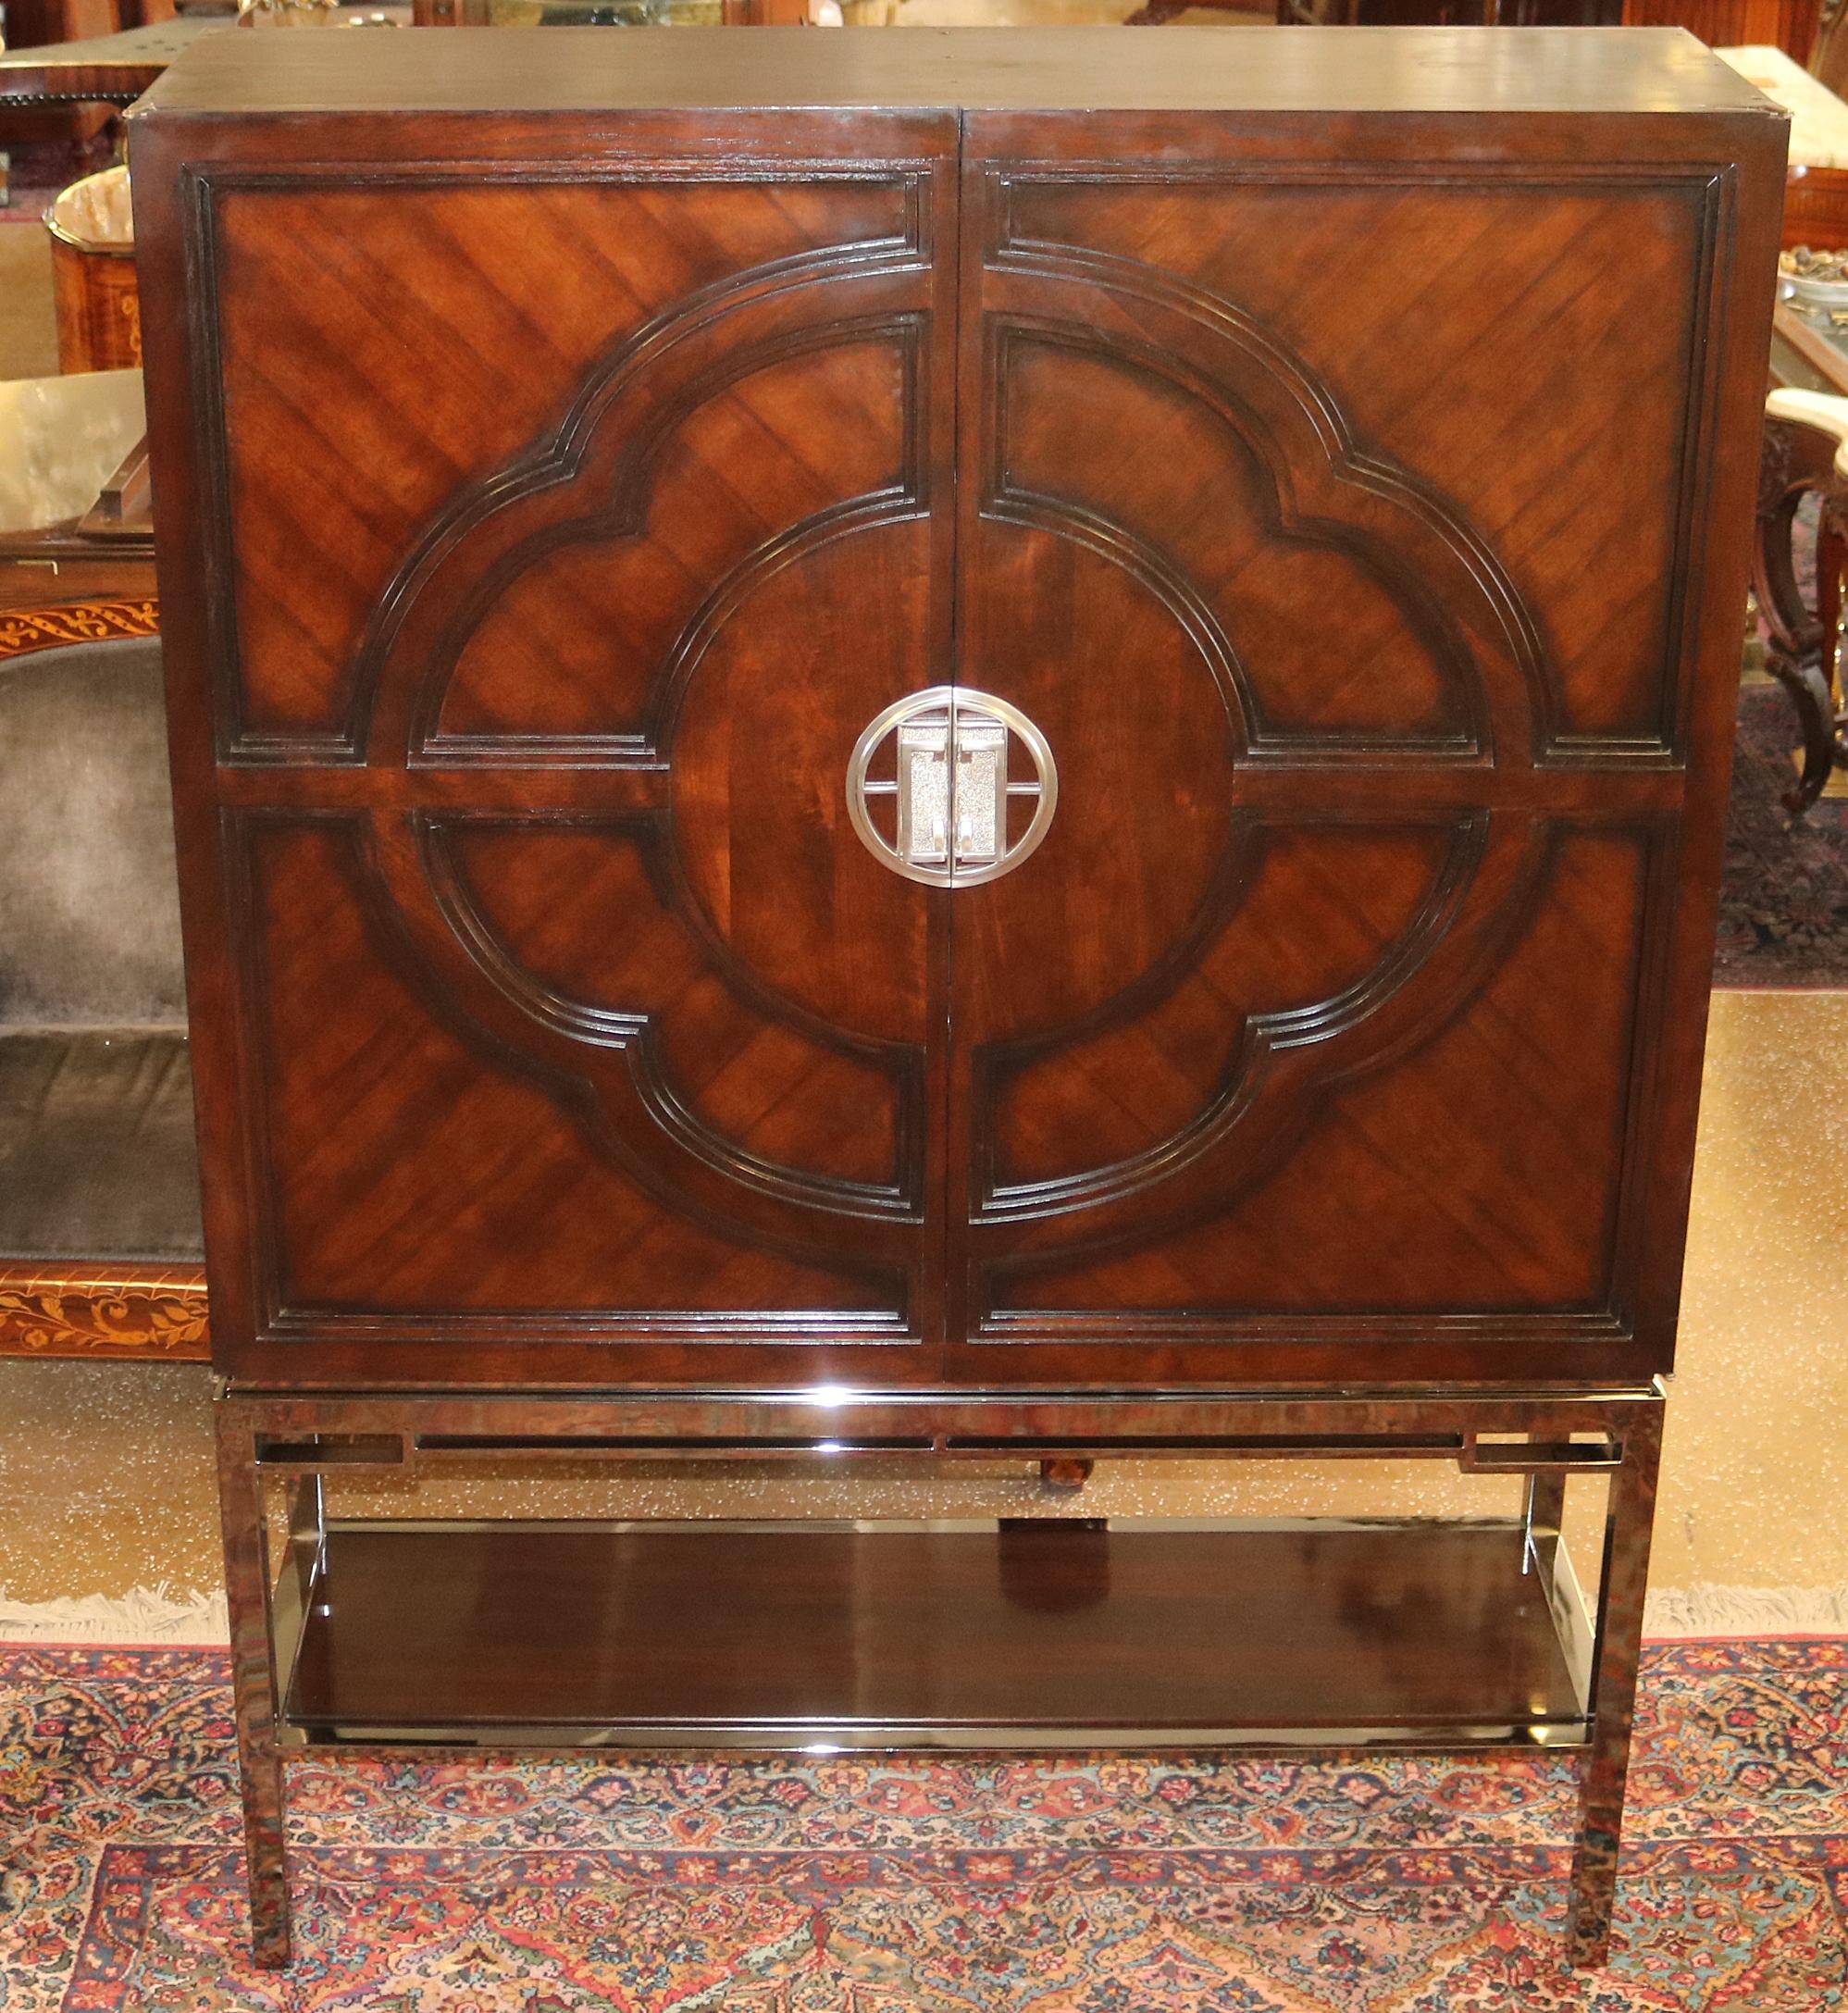 ​Awesome Chin Hua Lotus Bar Cabinet by Century Furniture

Dimensions : 54